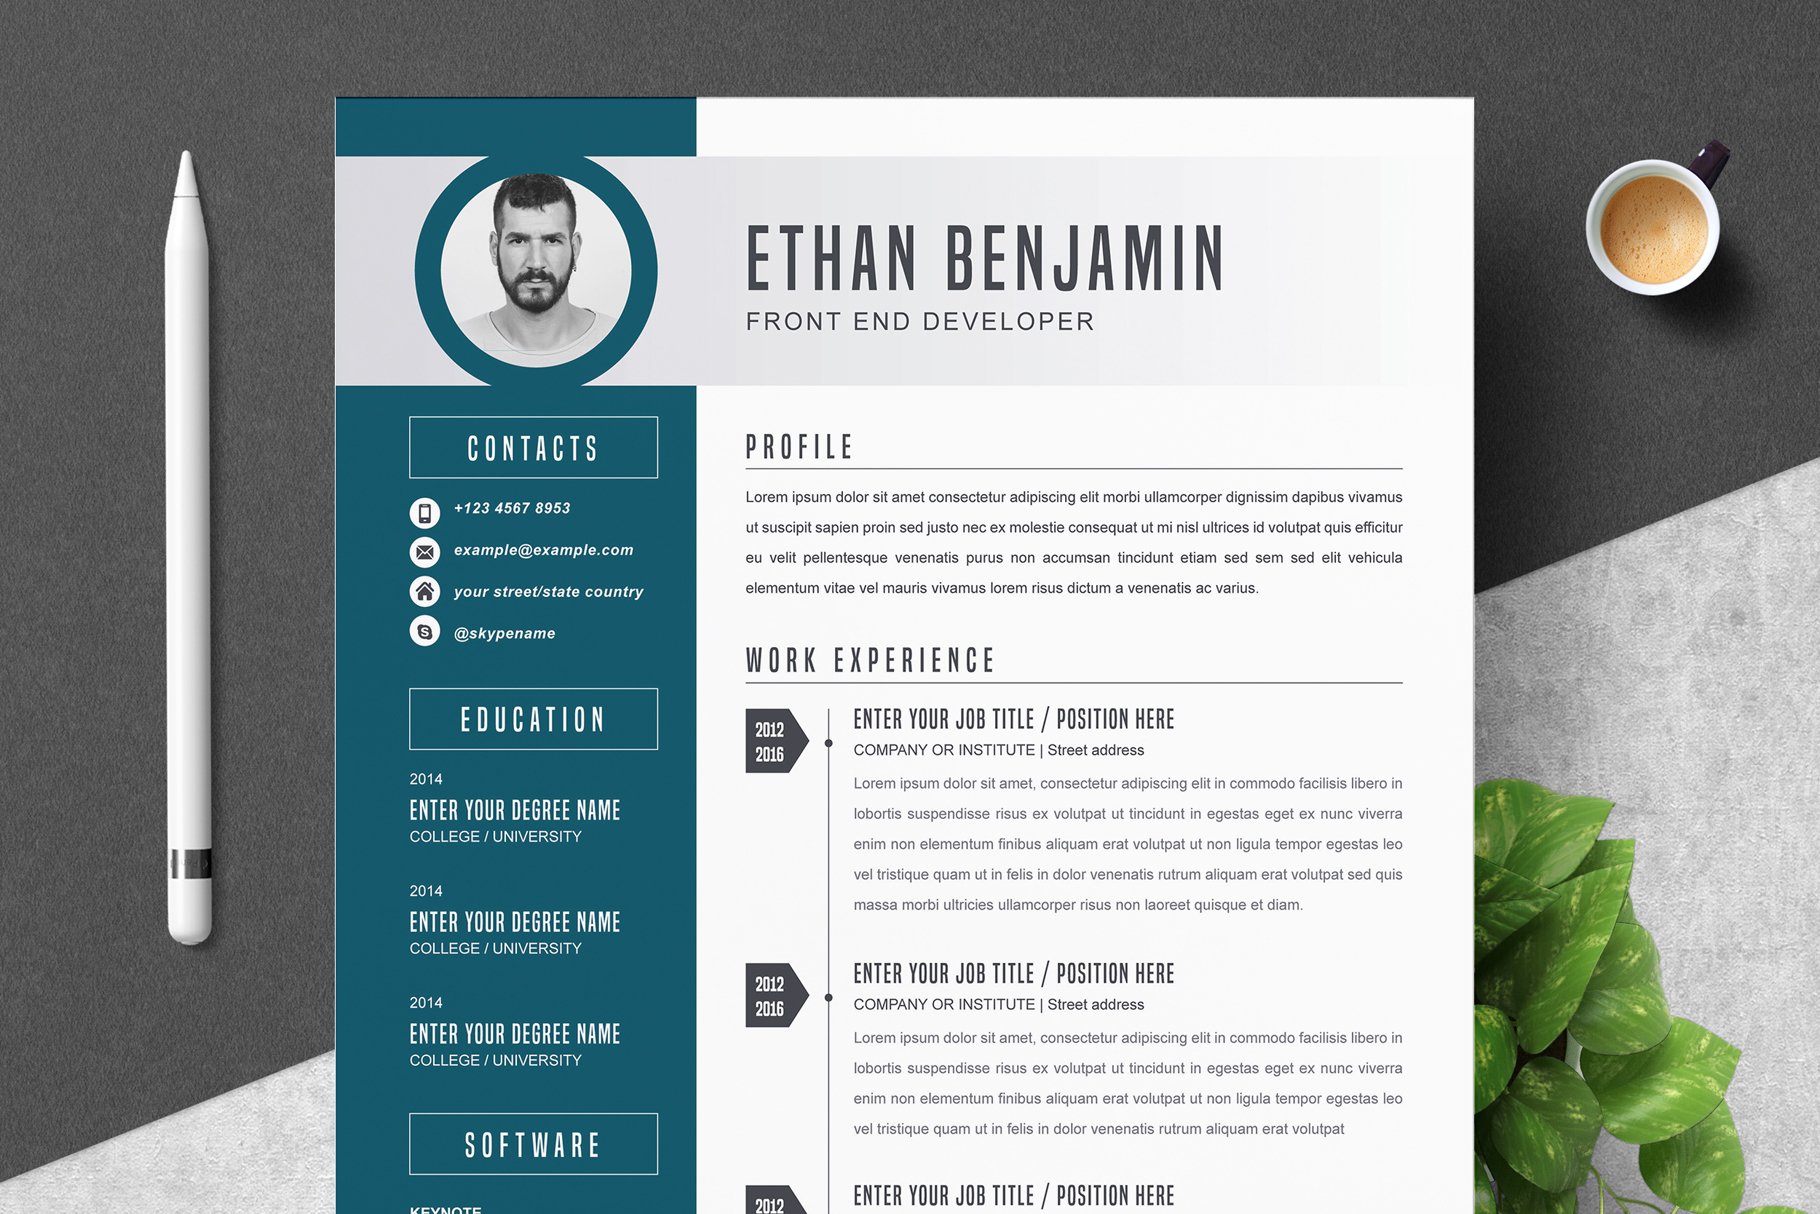 Resume Template  4 Pages Pack - Design Cuts